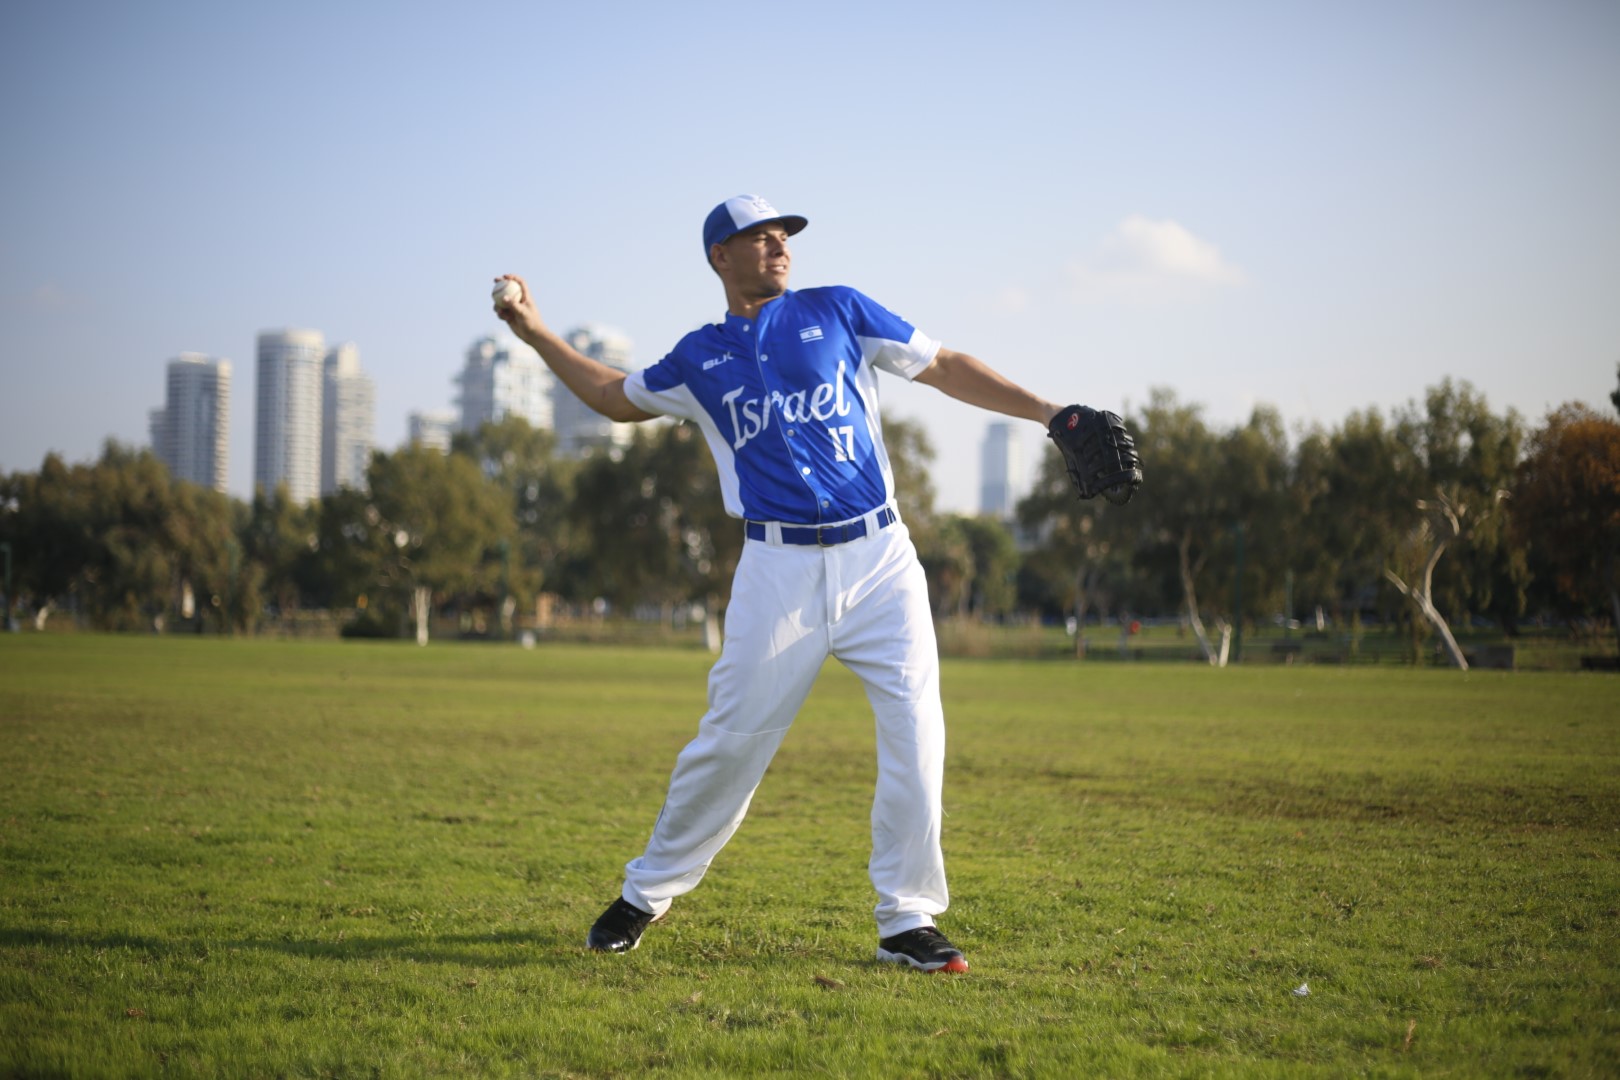 Israel Prepares for World Baseball Classic - The New York Times